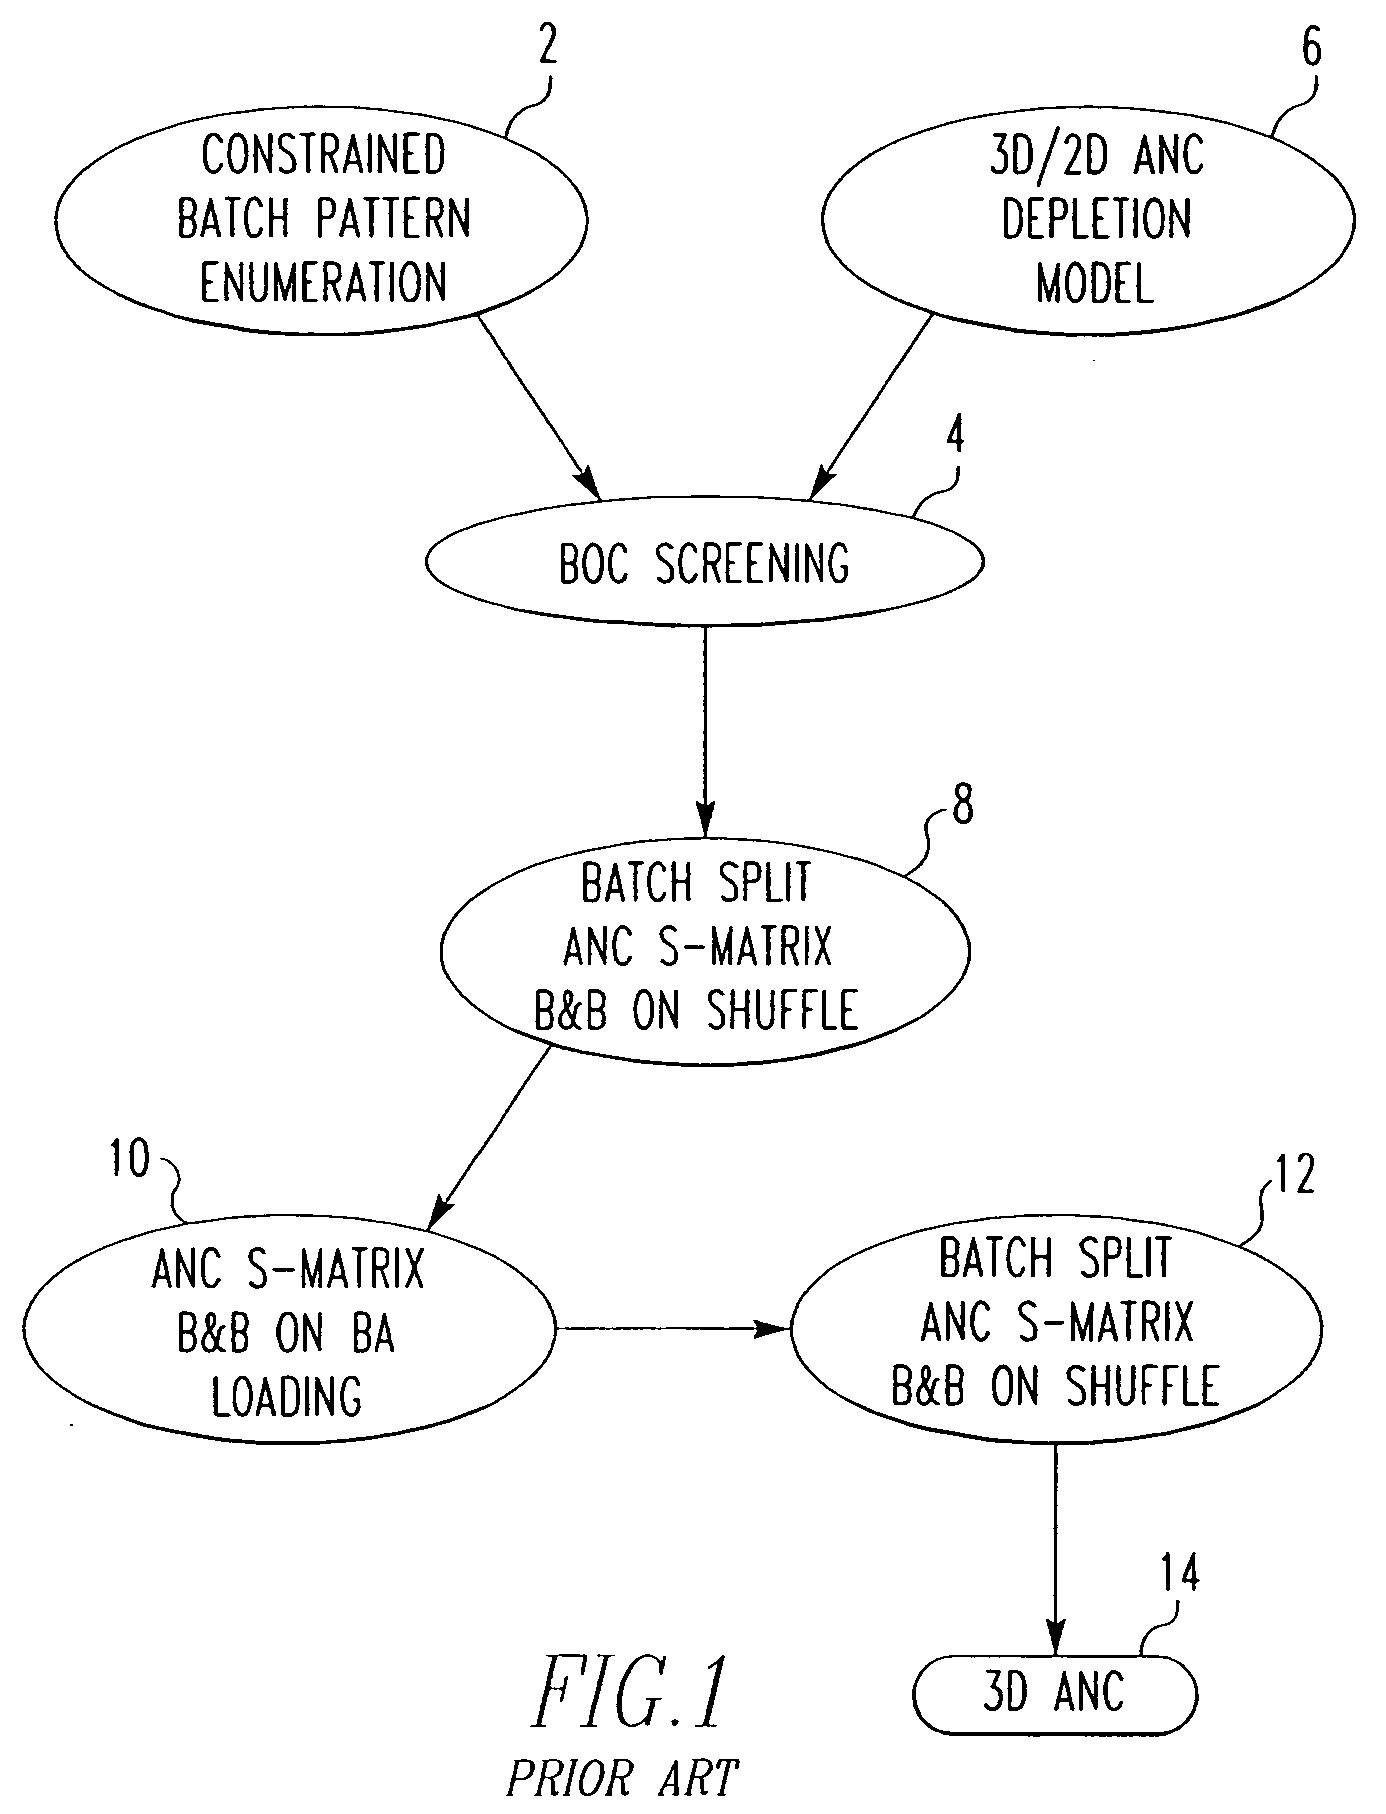 Method and algorithm for searching and optimizing nuclear reactor core loading patterns